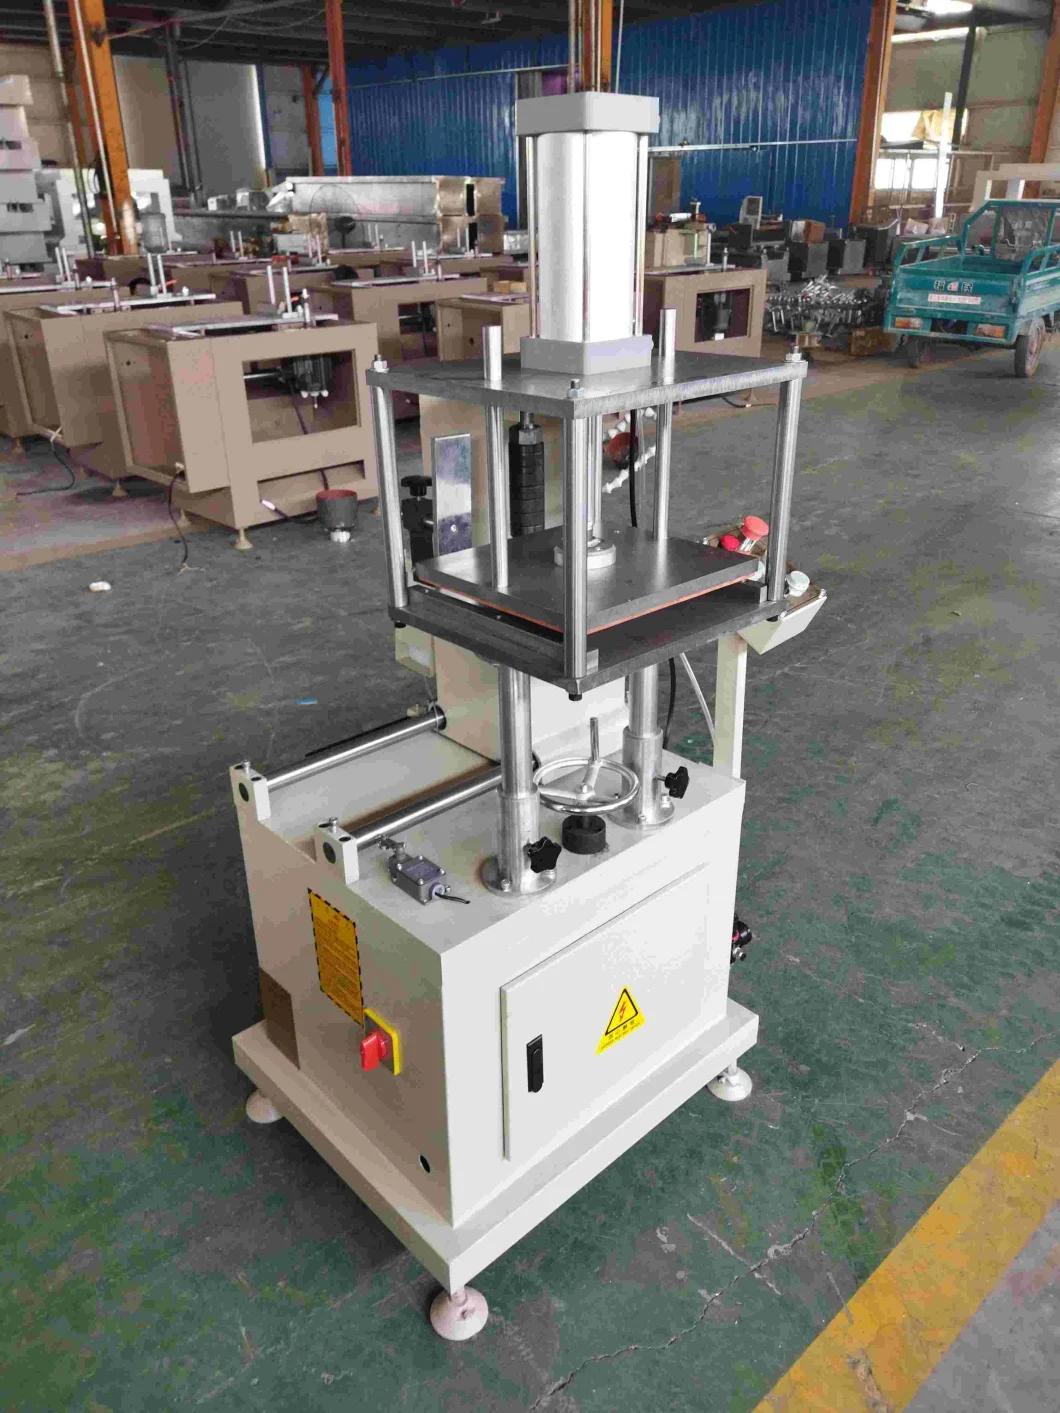 Lxd-200A Aluminum Profile Milling Machine for End Faces and Tenons CNC Machine for Aluminum Doors and Windows Making CNC Cutter